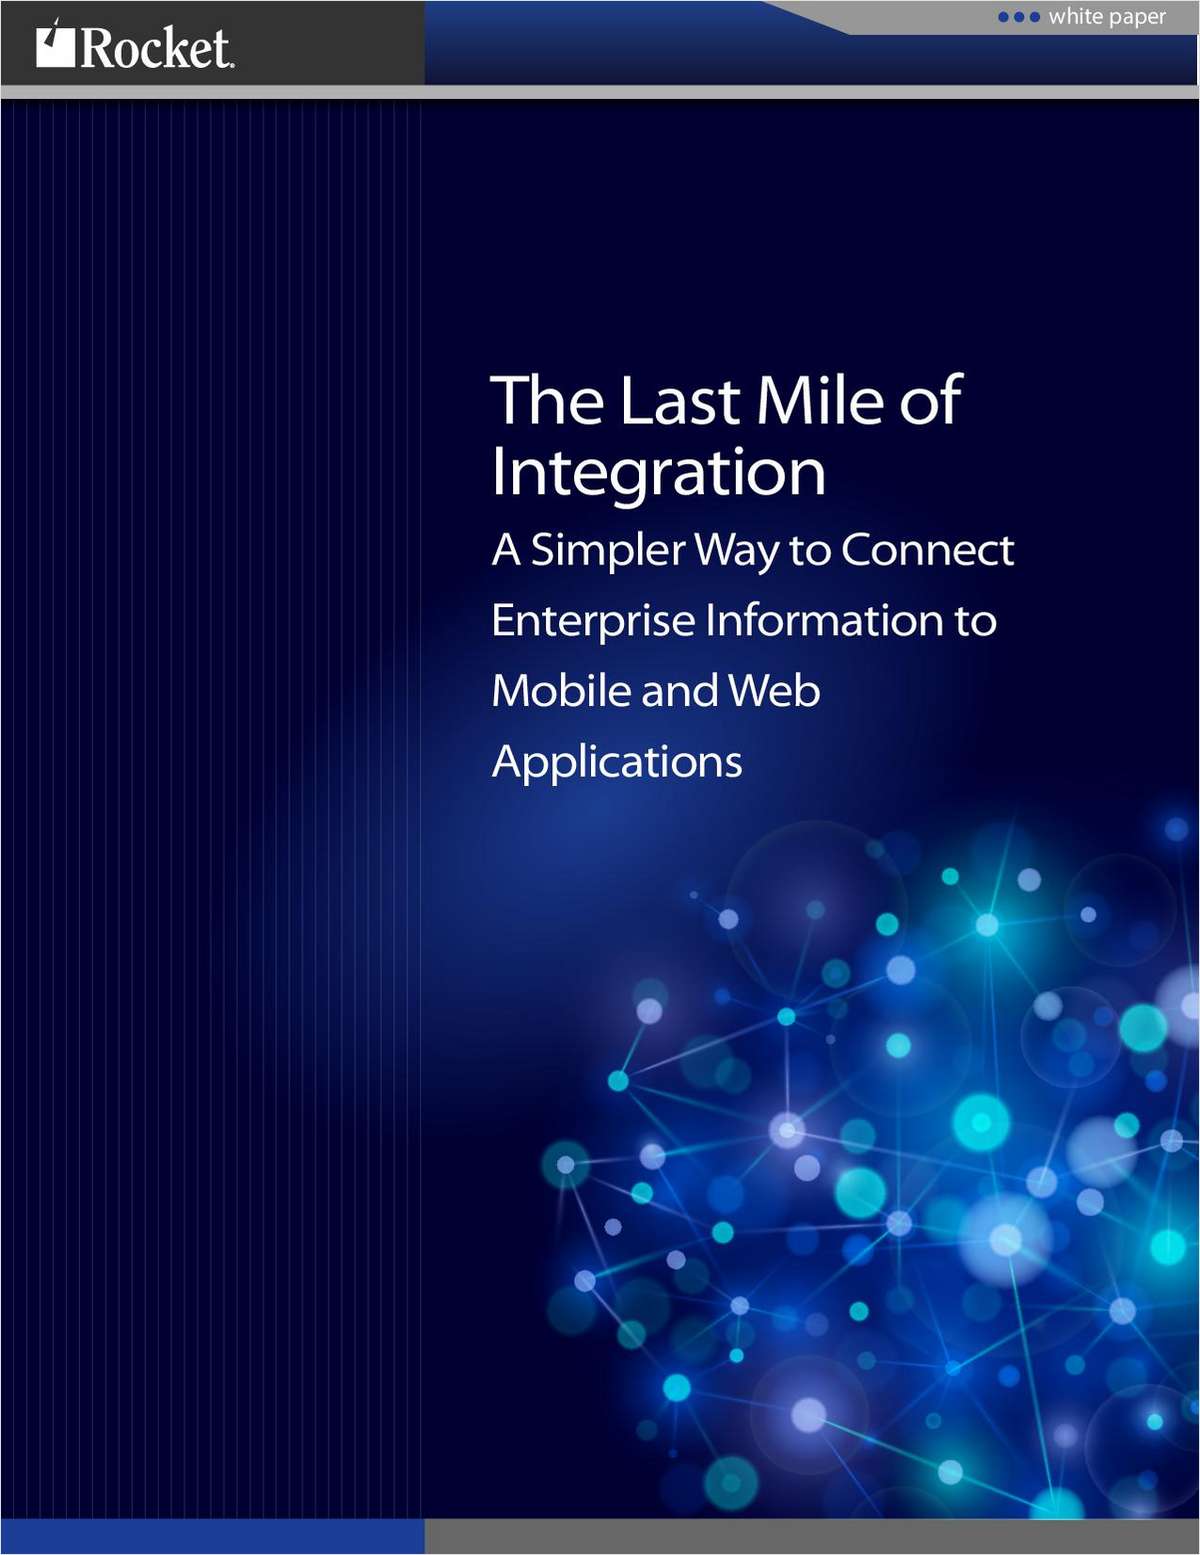 Discover the Fast and Low Risk Way to Integrate Enterprise Applications